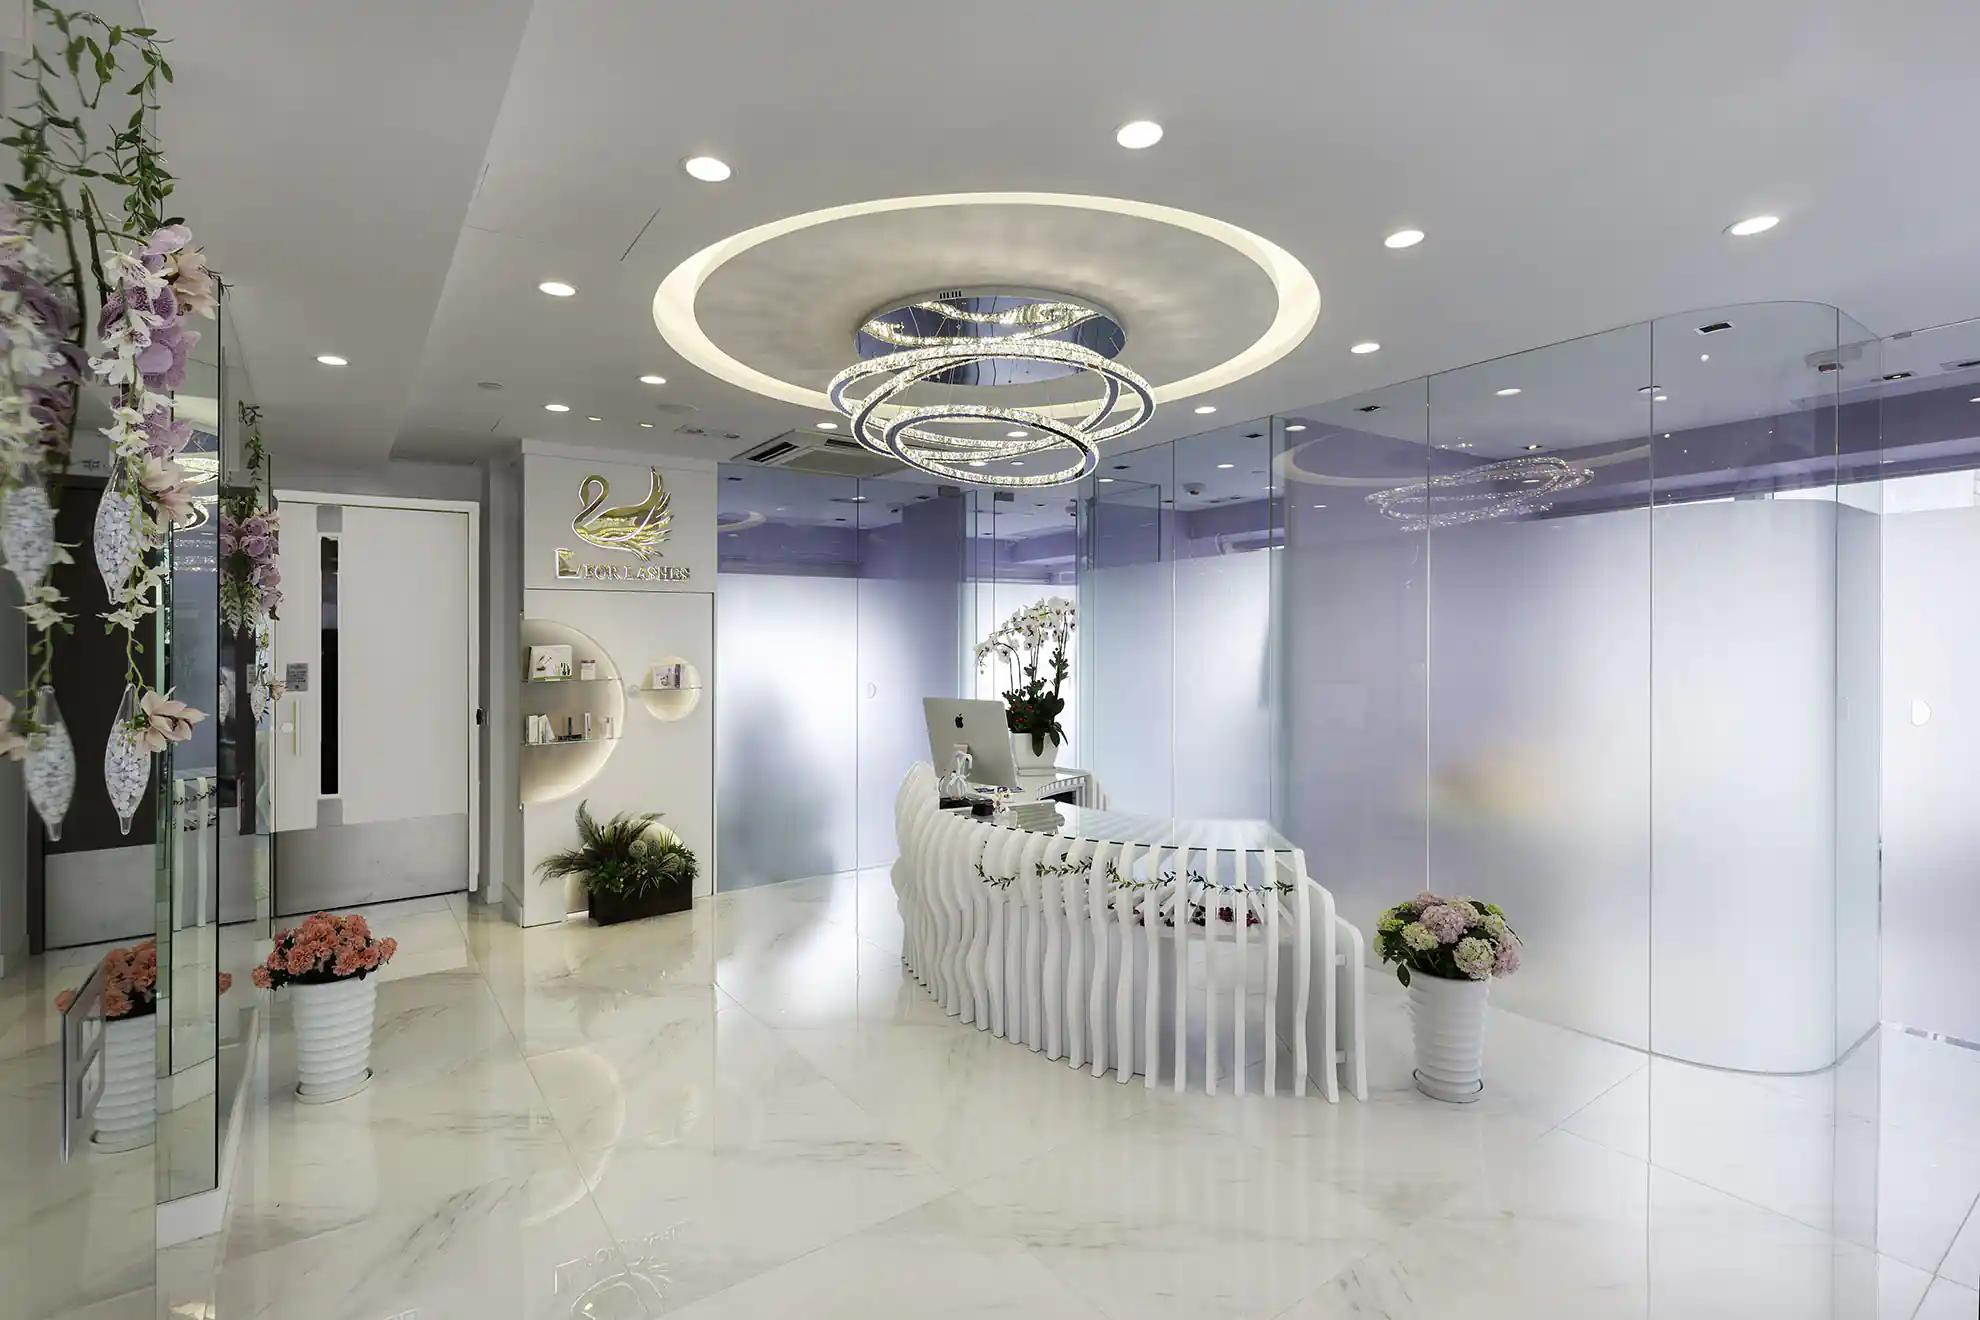 Reception hall of L for Lashes